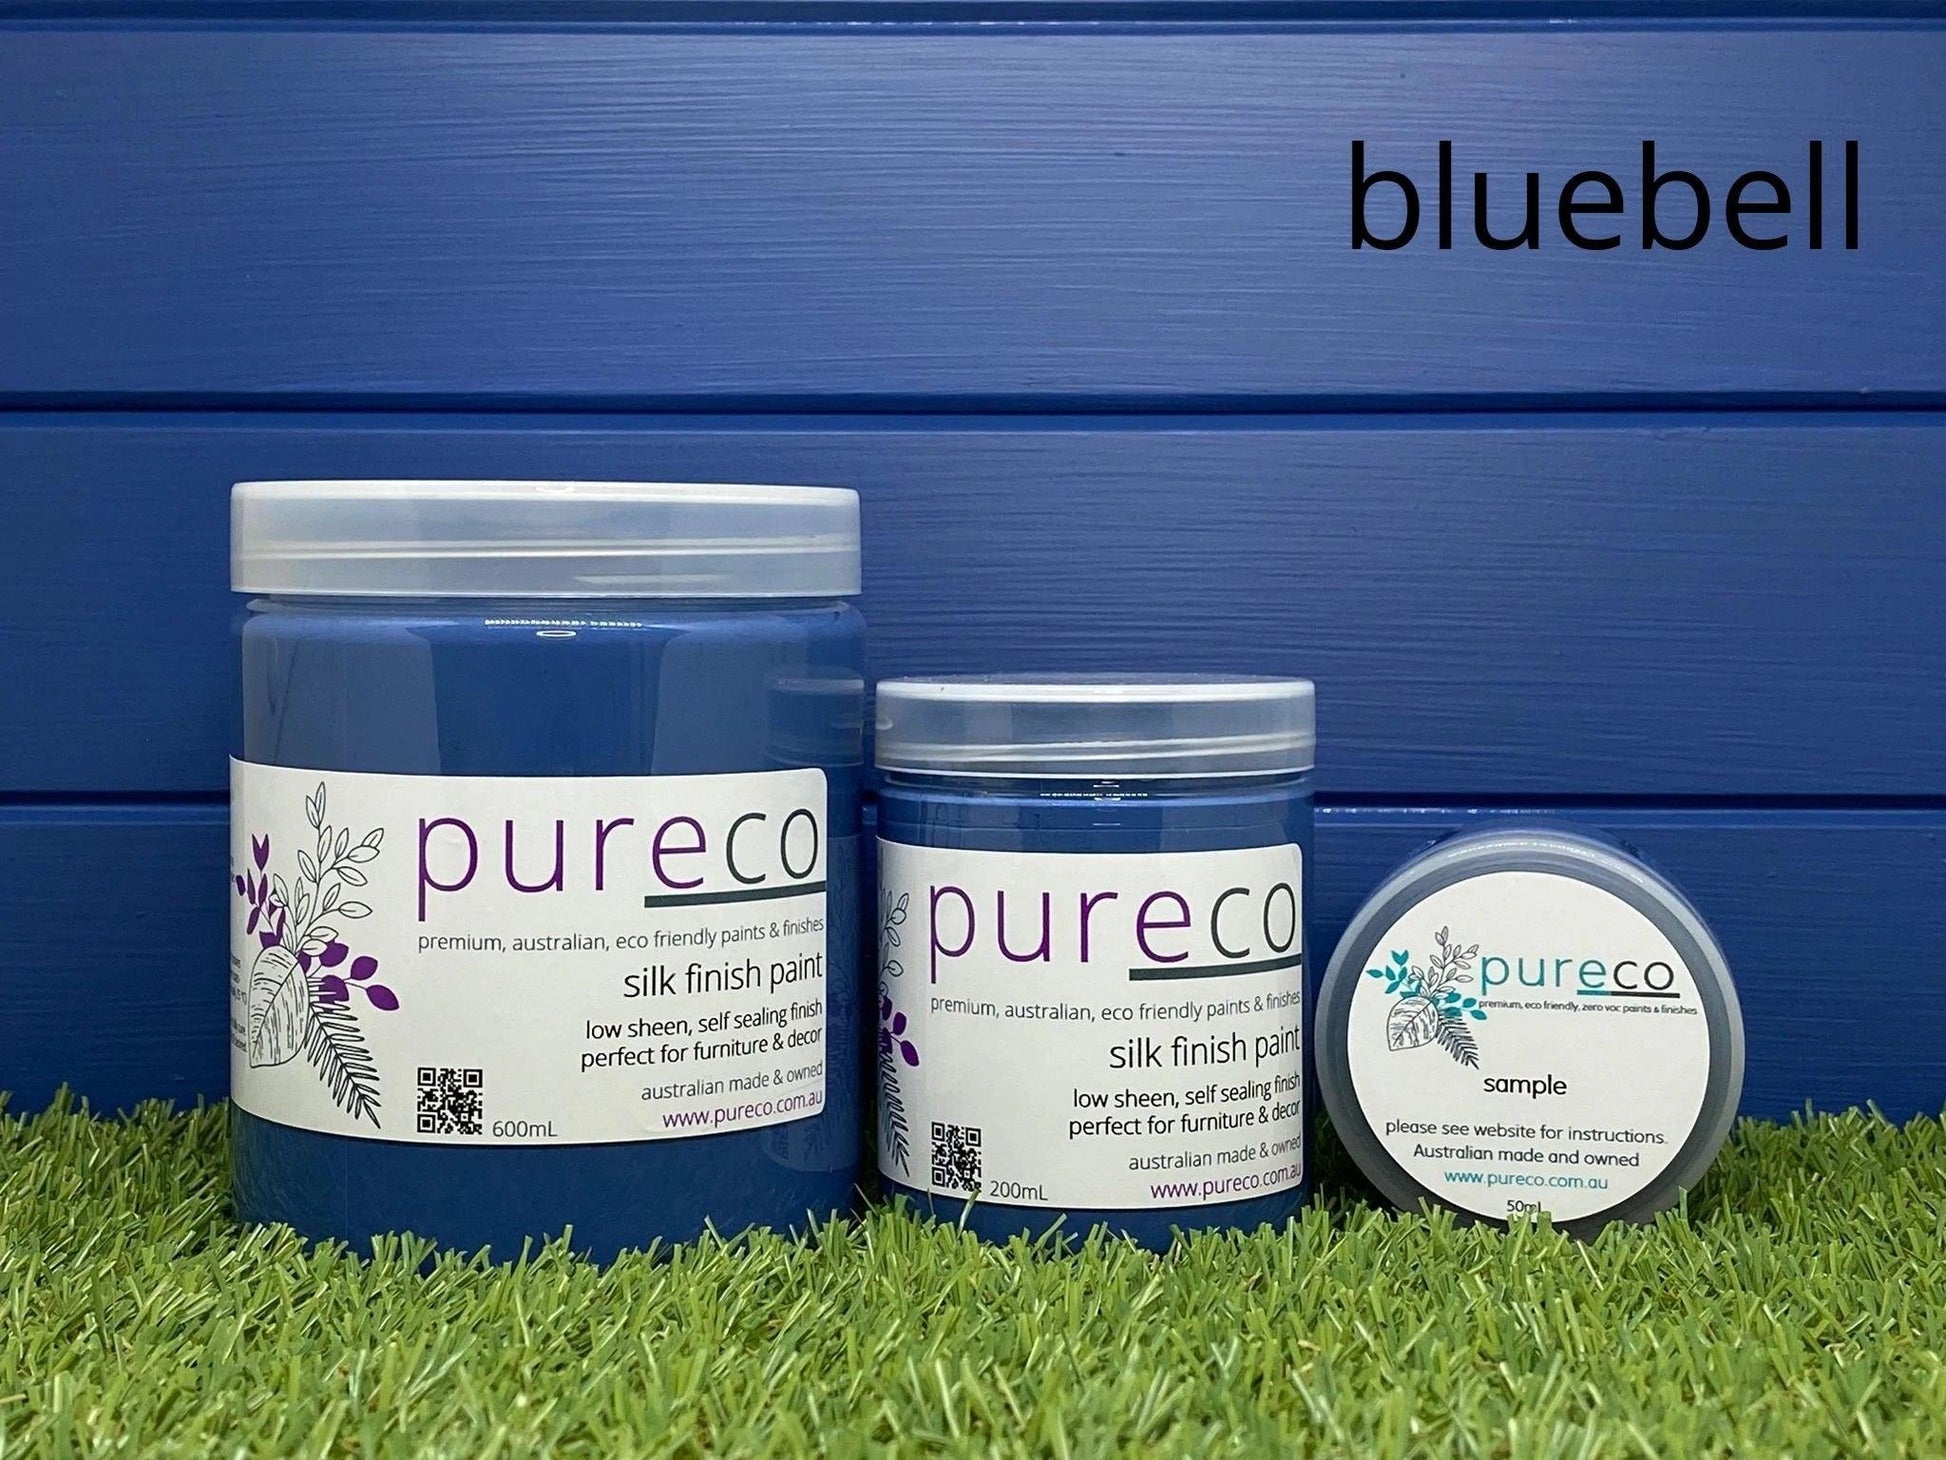 Pureco Chalk Paint Bluebell